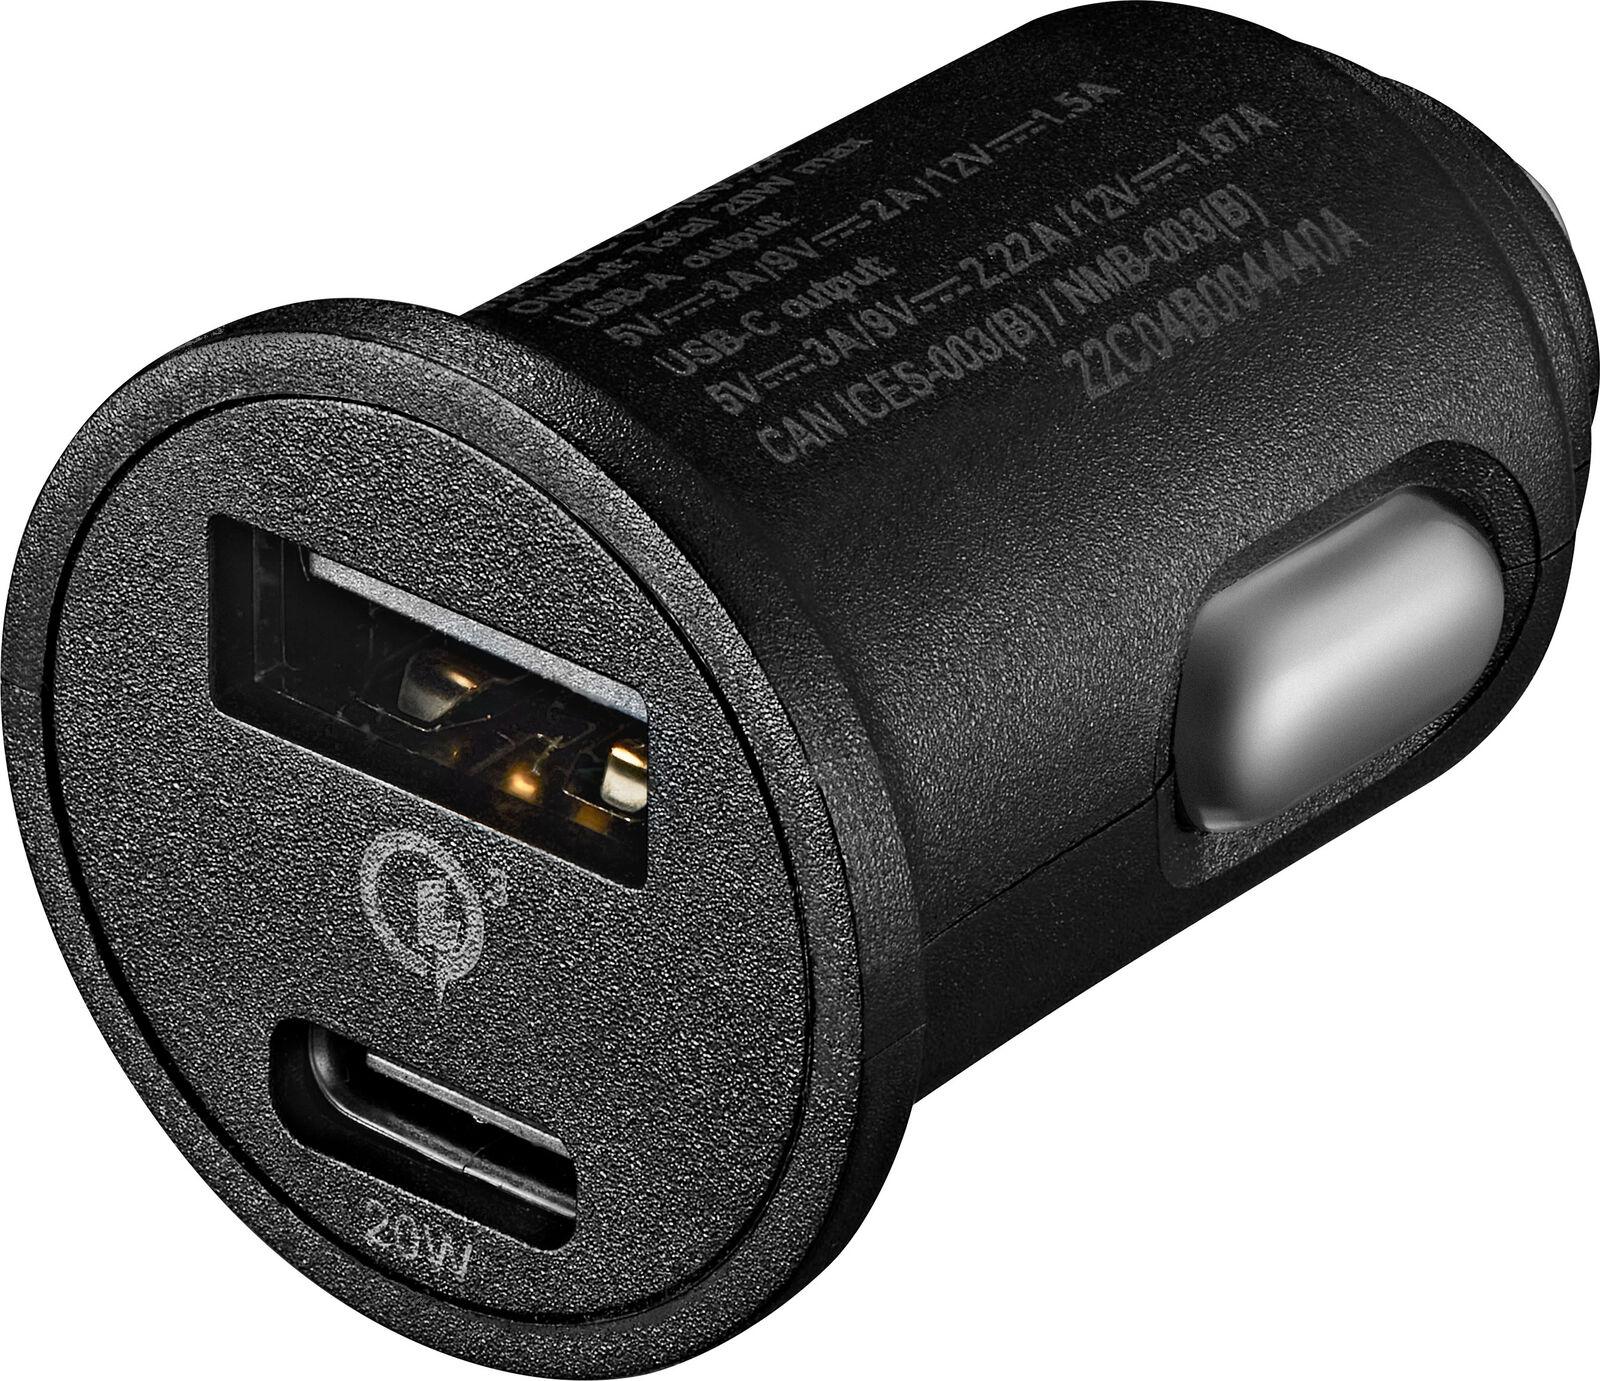 Insignia 20W USB-C and USB Vehicle Charger for $9.99 Shipped